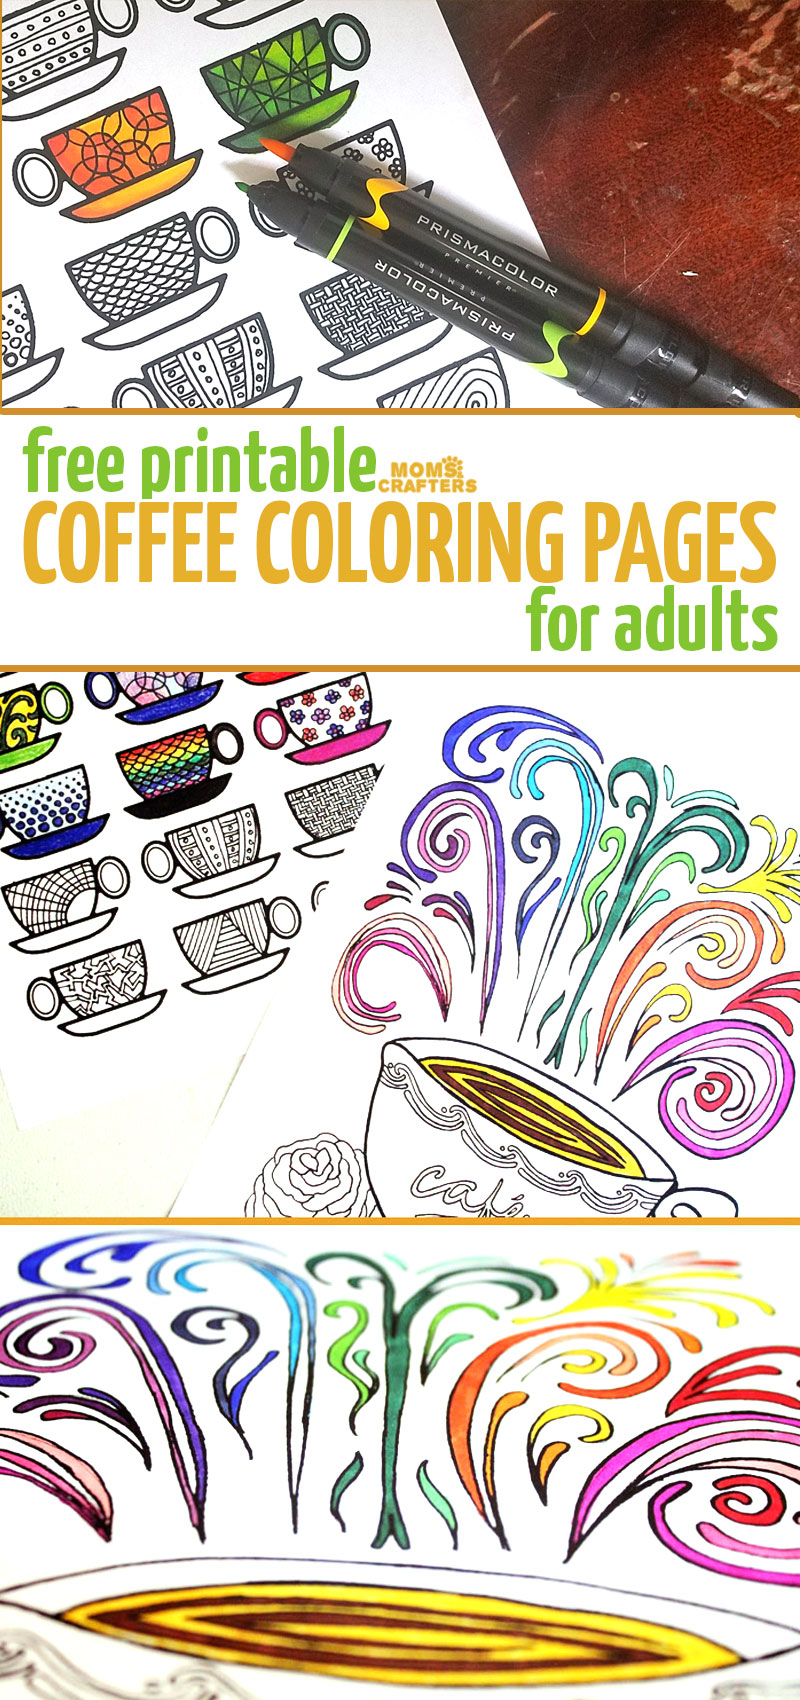 Free Printable Adult Coloring Pages + Tips for Blending Colors